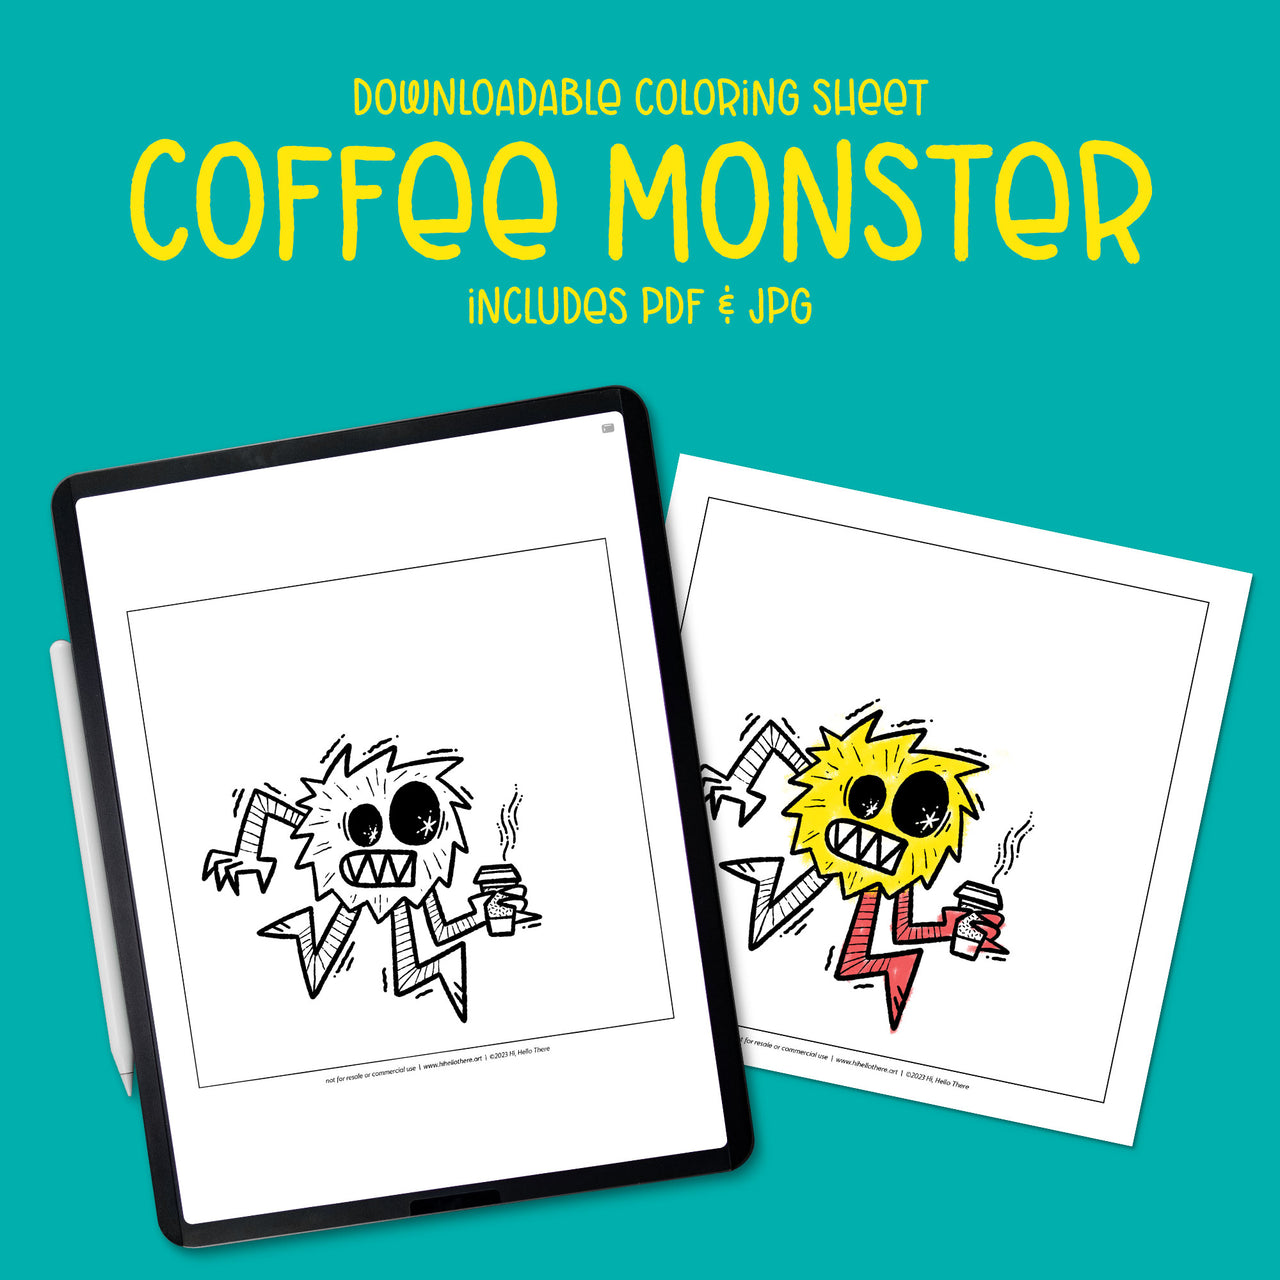 Coffee Monster Downloadable Coloring Sheet